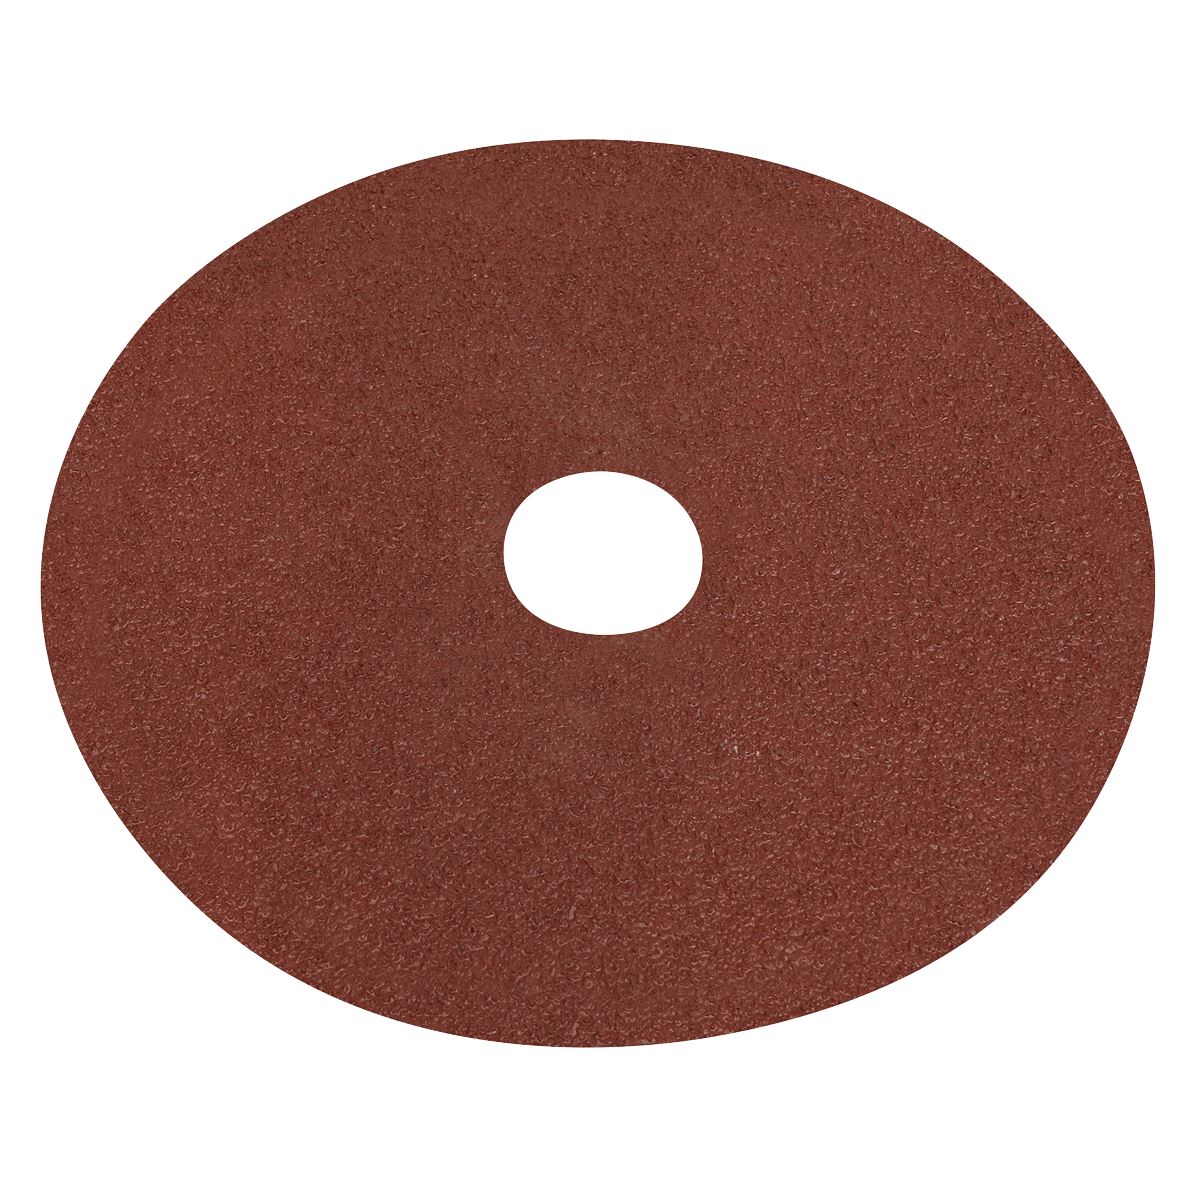 Worksafe by Sealey Fibre Backed Disc Ø125mm - 40Grit Pack of 25